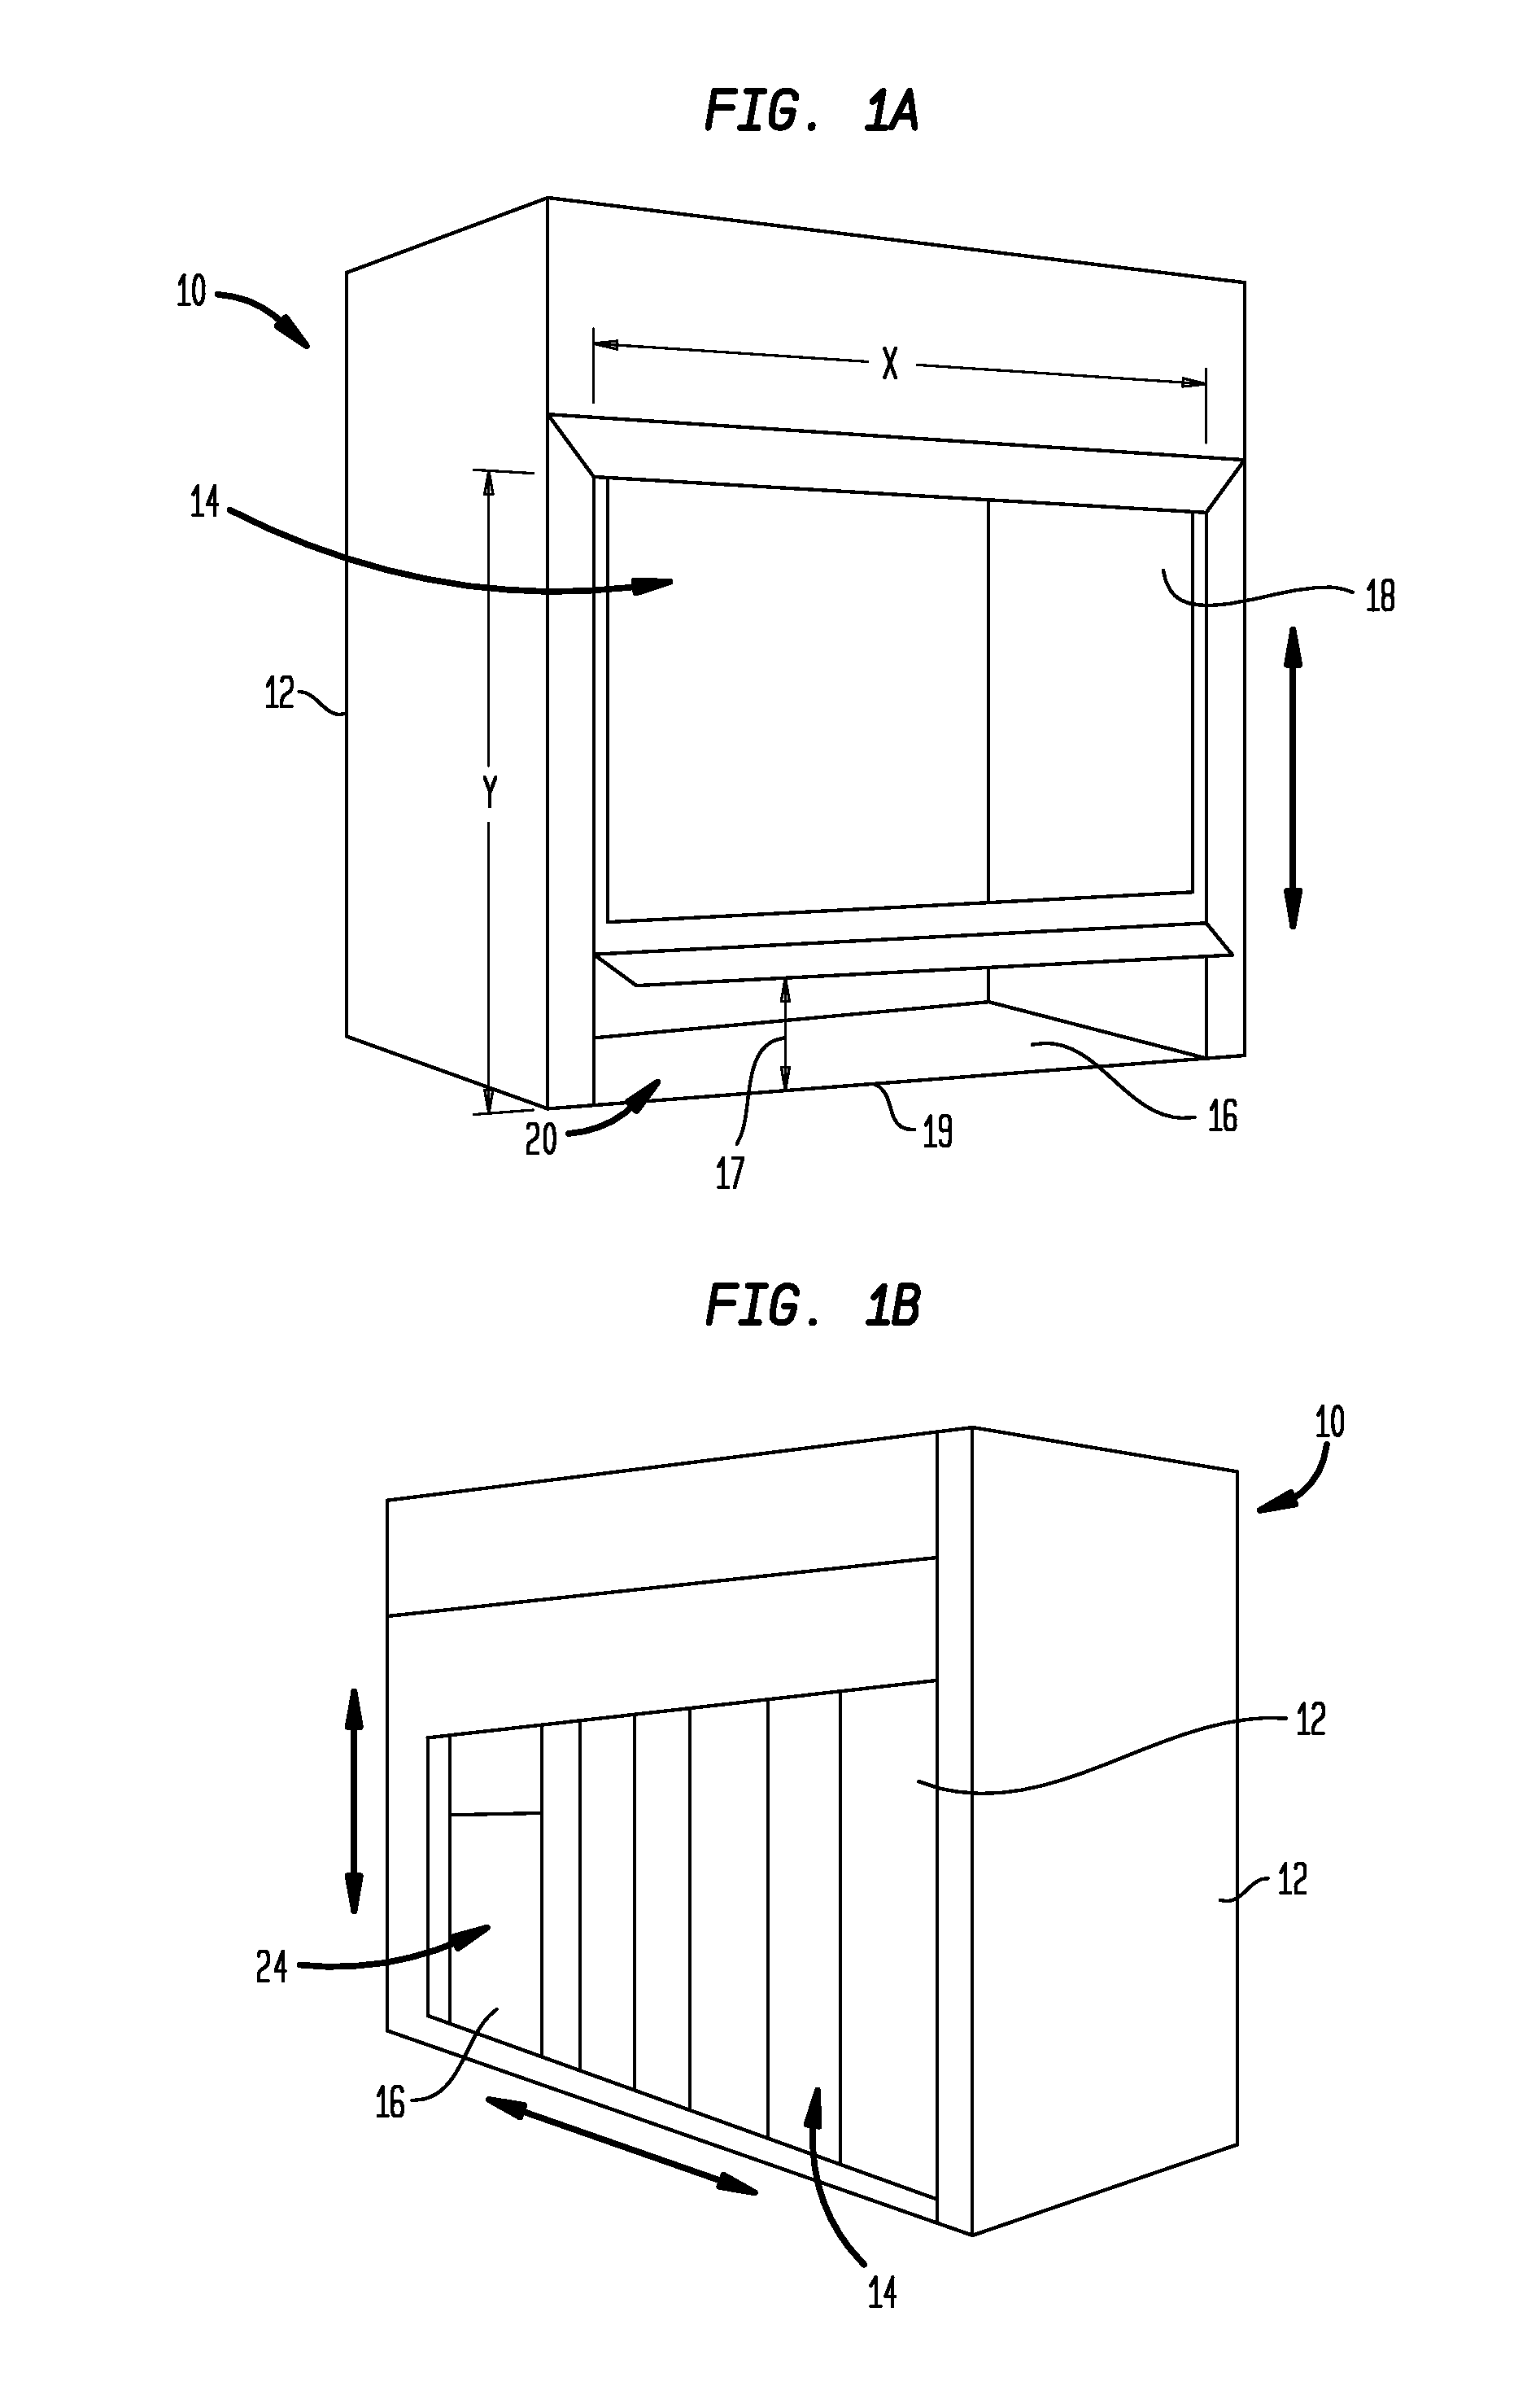 System for detecting a position of a fume hood sash